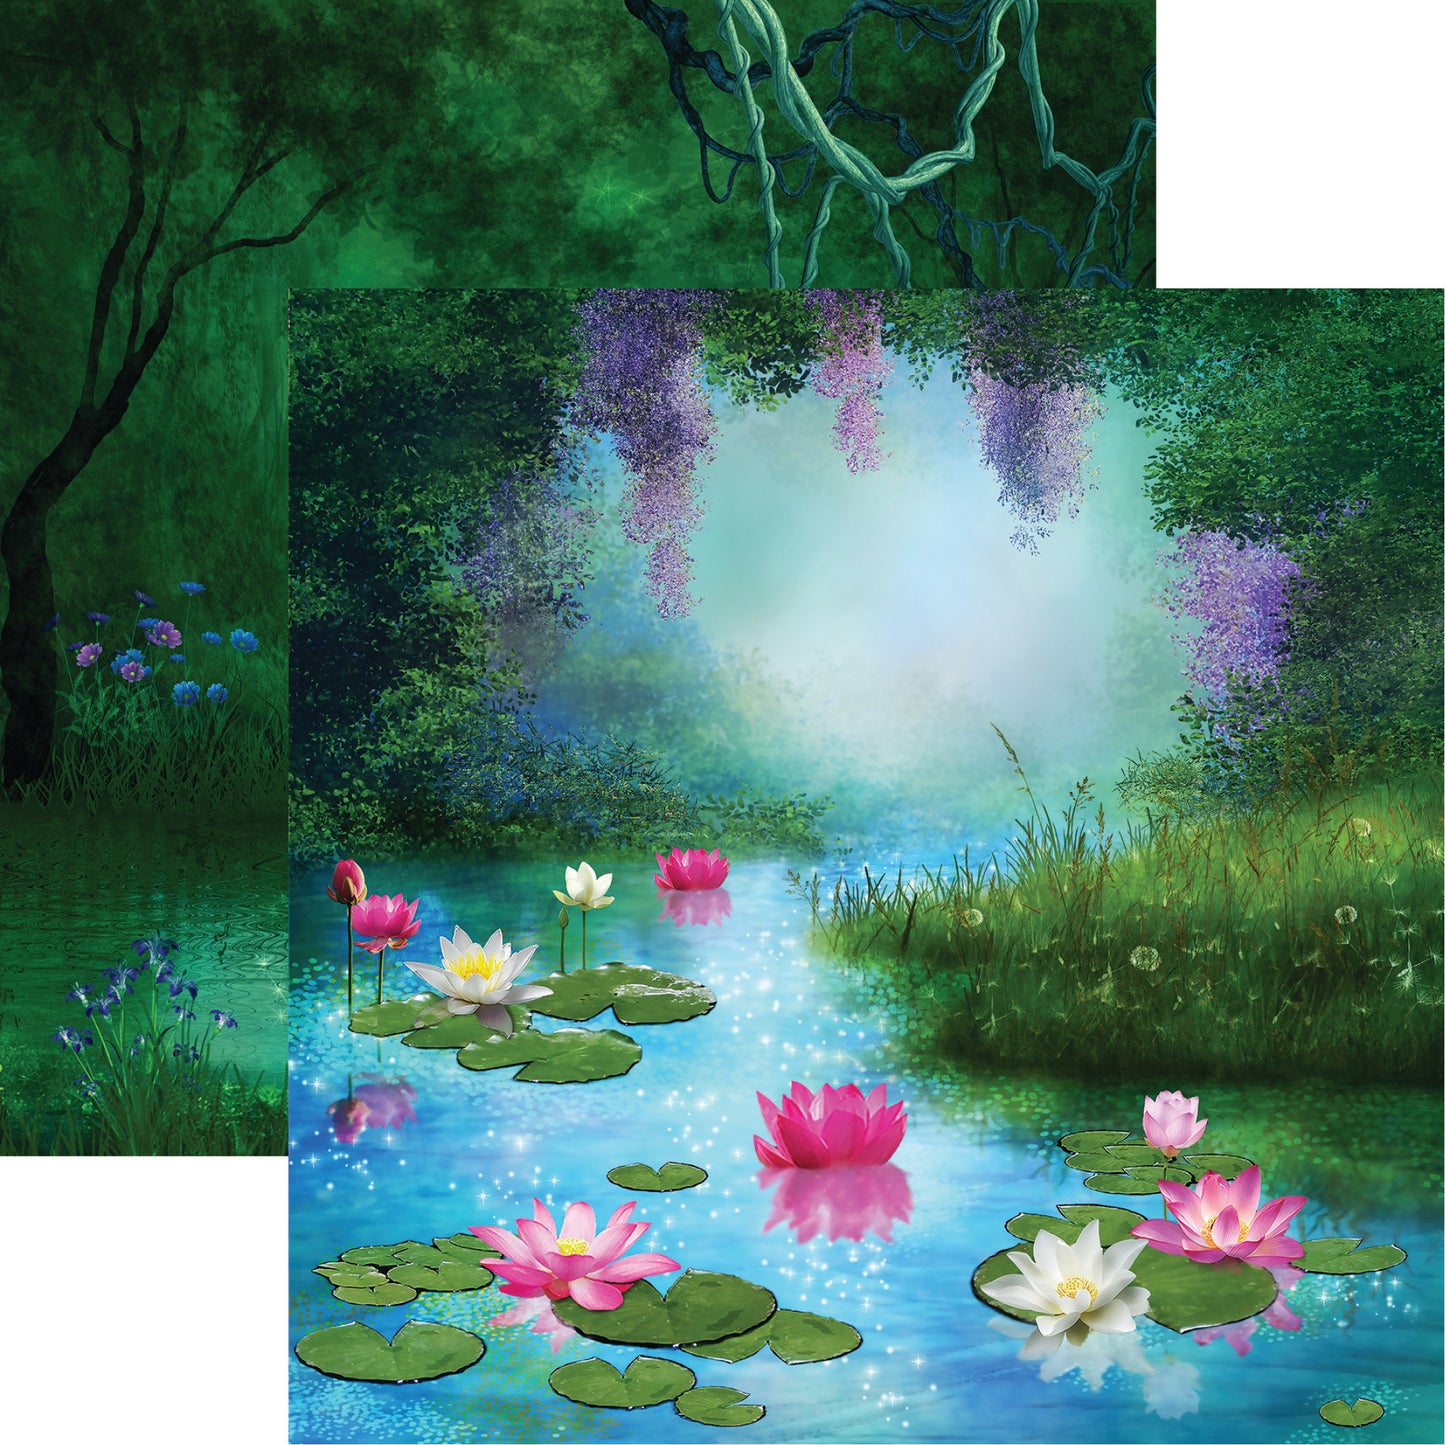 Pond of Lilliies Enchanted Forest Scrapbook Paper